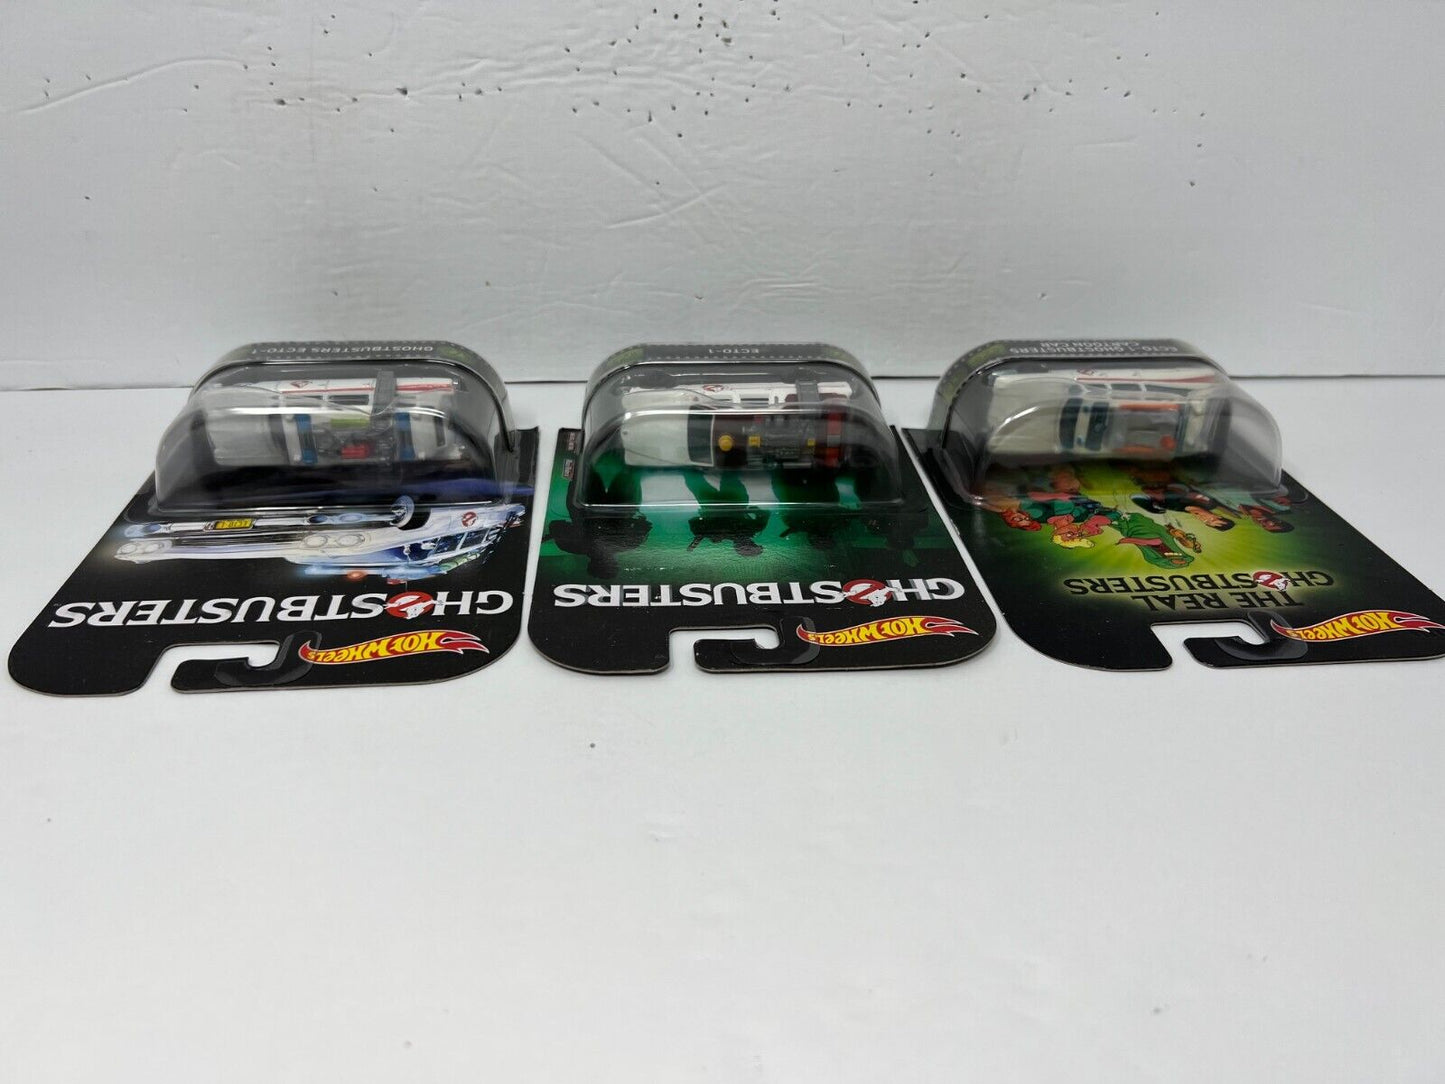 Hot Wheels Retro Entertainment Ghostbusters Ecto-1 Cars 1:64 Diecast Lot of 3